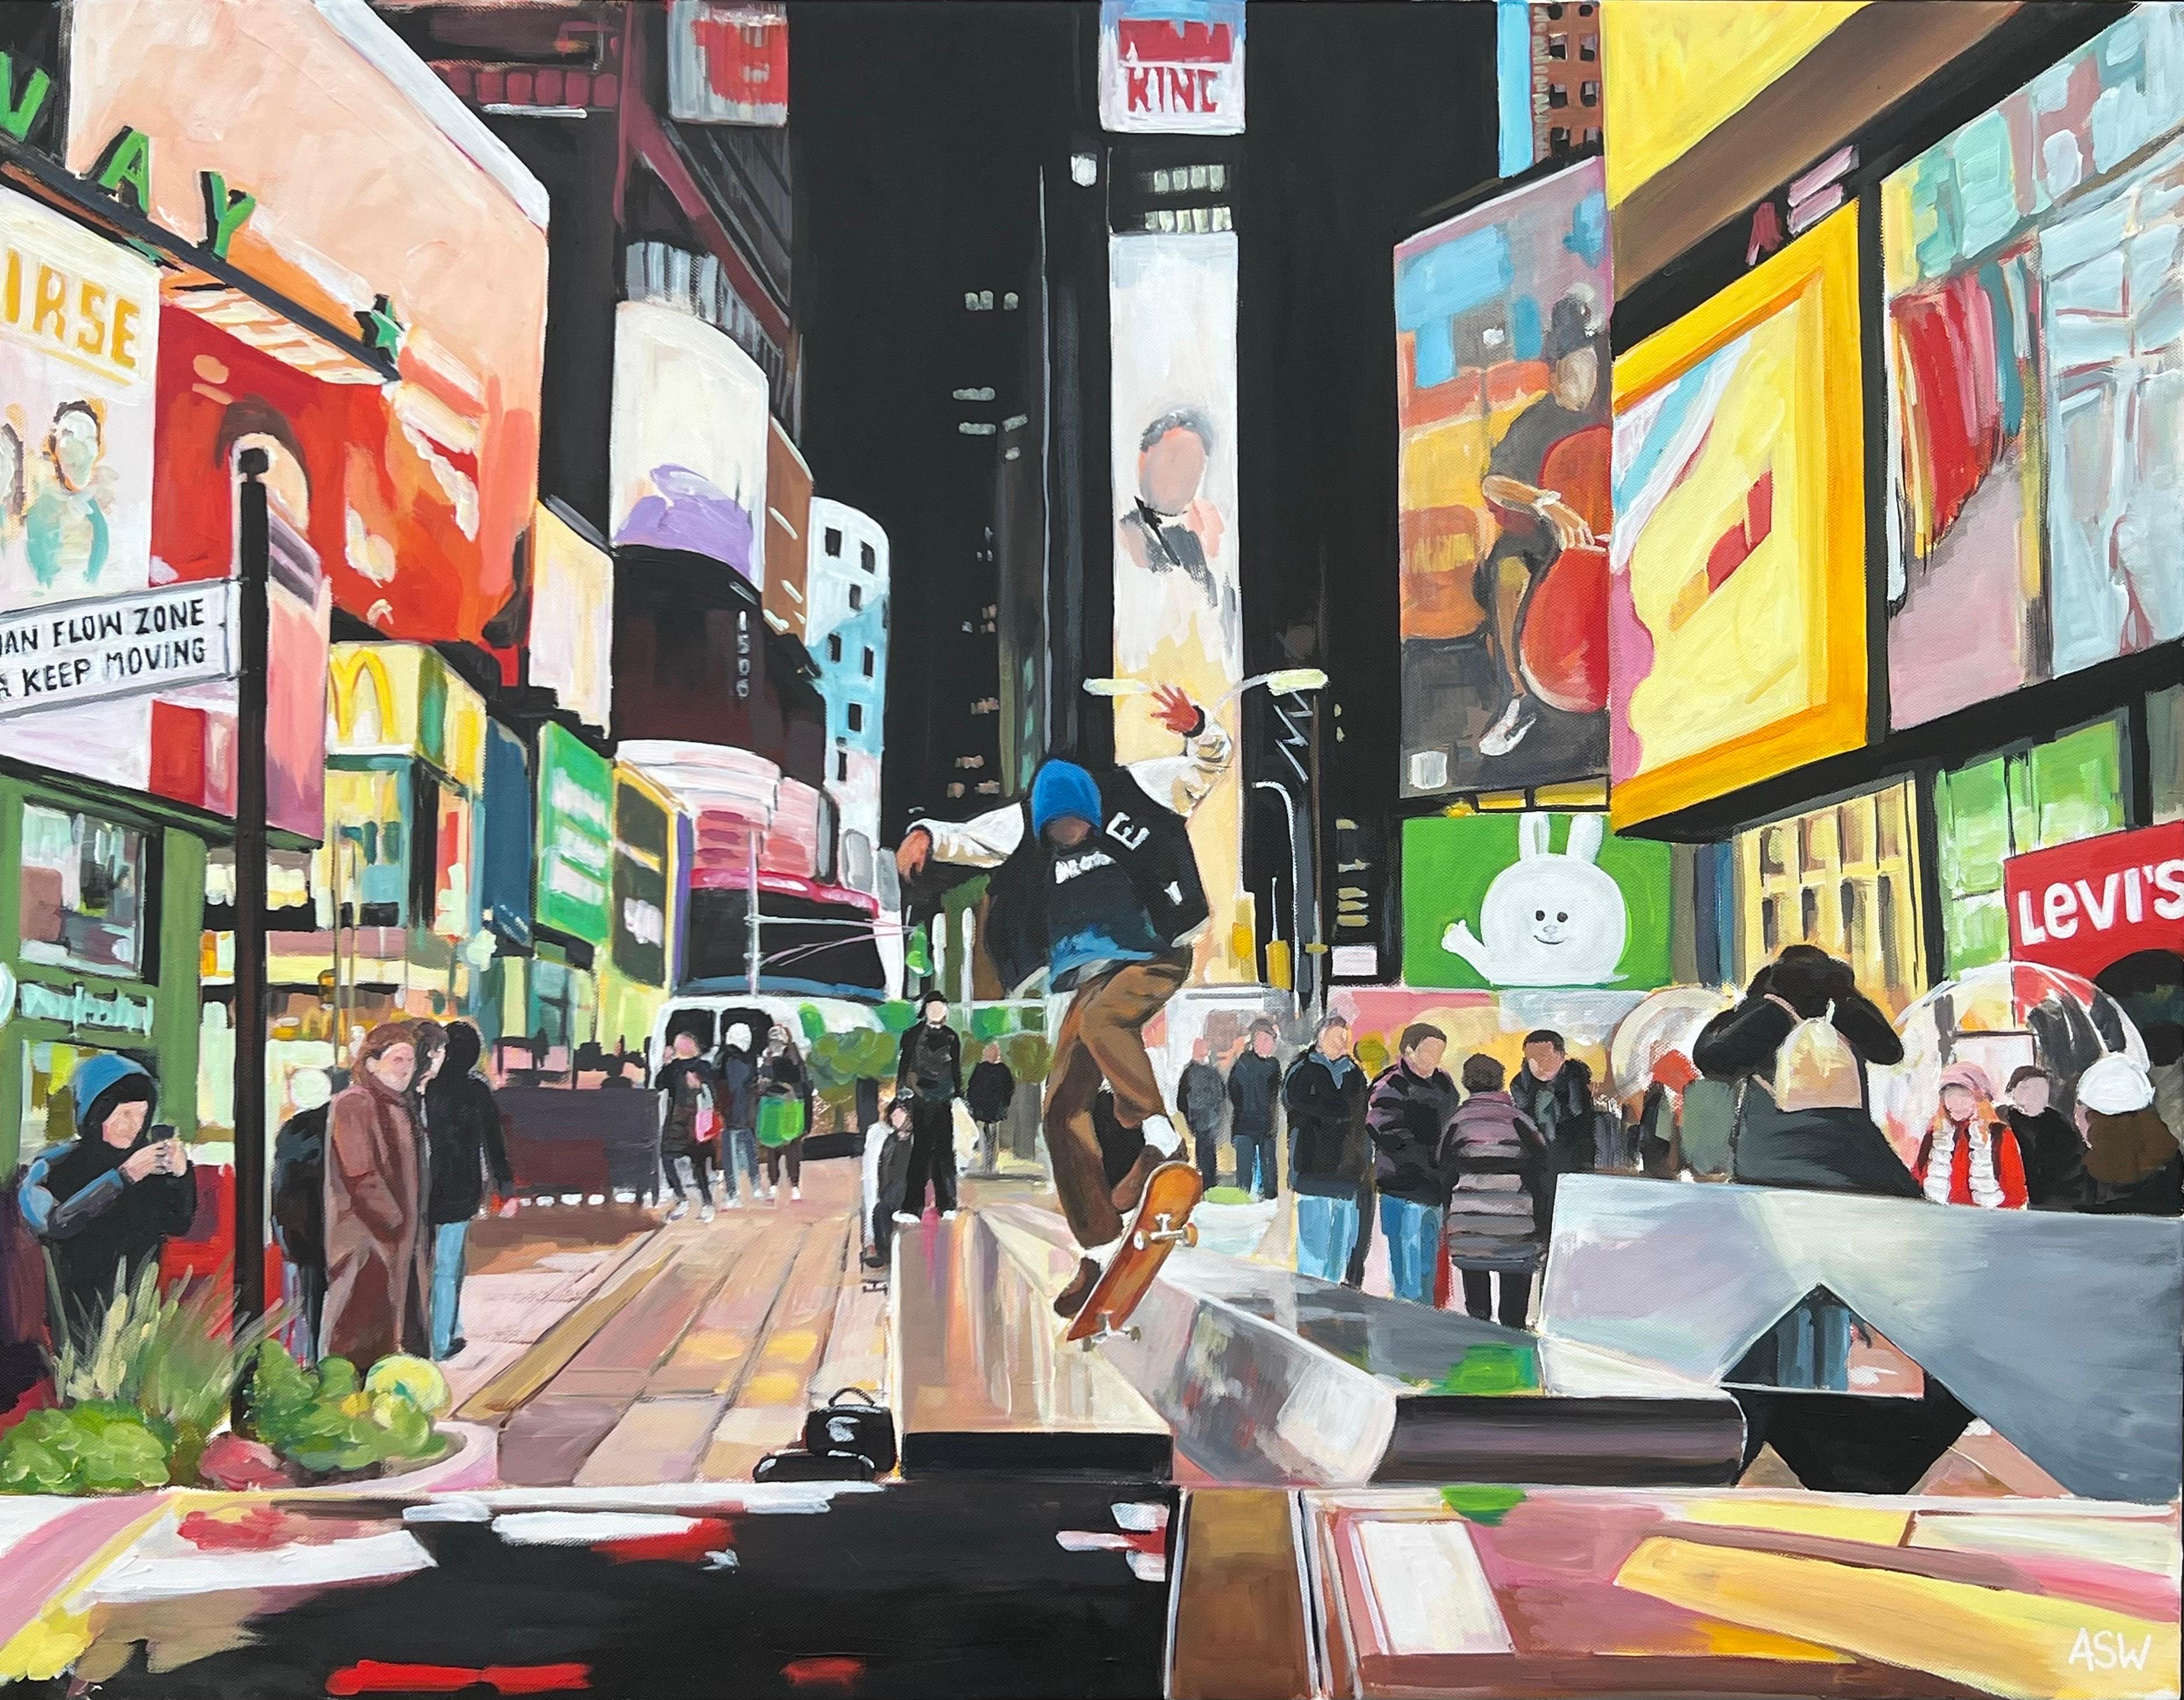 Skate Boarder Times Square New York City after the Rain by British Urban Artist